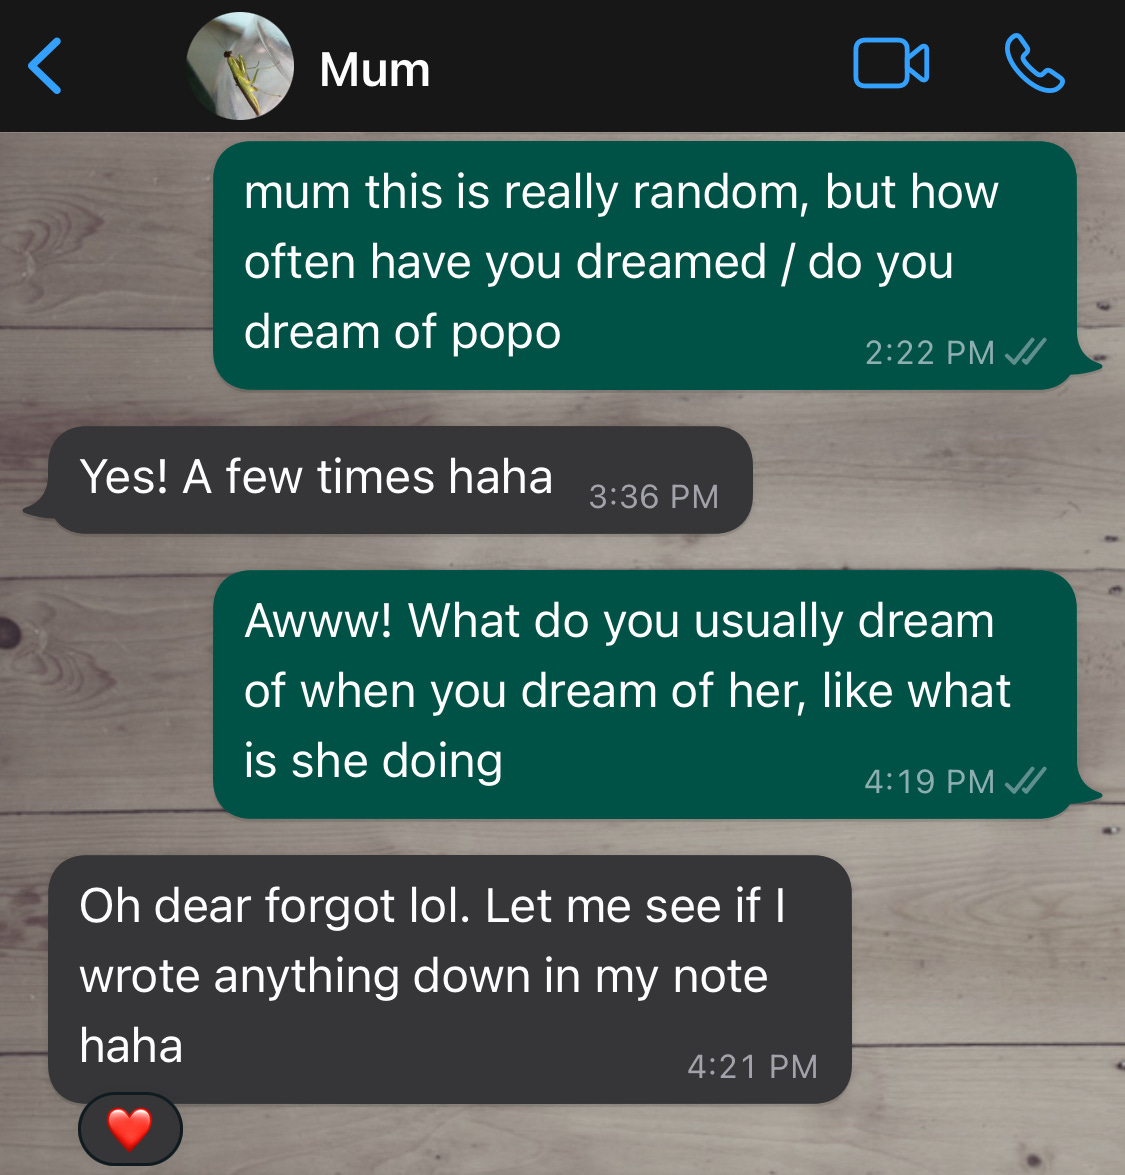 A series of WhatsApp text messages. Me: “mum this is really random, but how often have you dreamed / do you dream of popo”. Mum: “Yes! A few times haha.” Me: “Awww! What do you usually dream of when you dream of her, like what is she doing” Mum: “Oh dear forgot lol. Let me see if I wrote anything down in my note haha” [I have left a ‘heart’ emoji on this message]